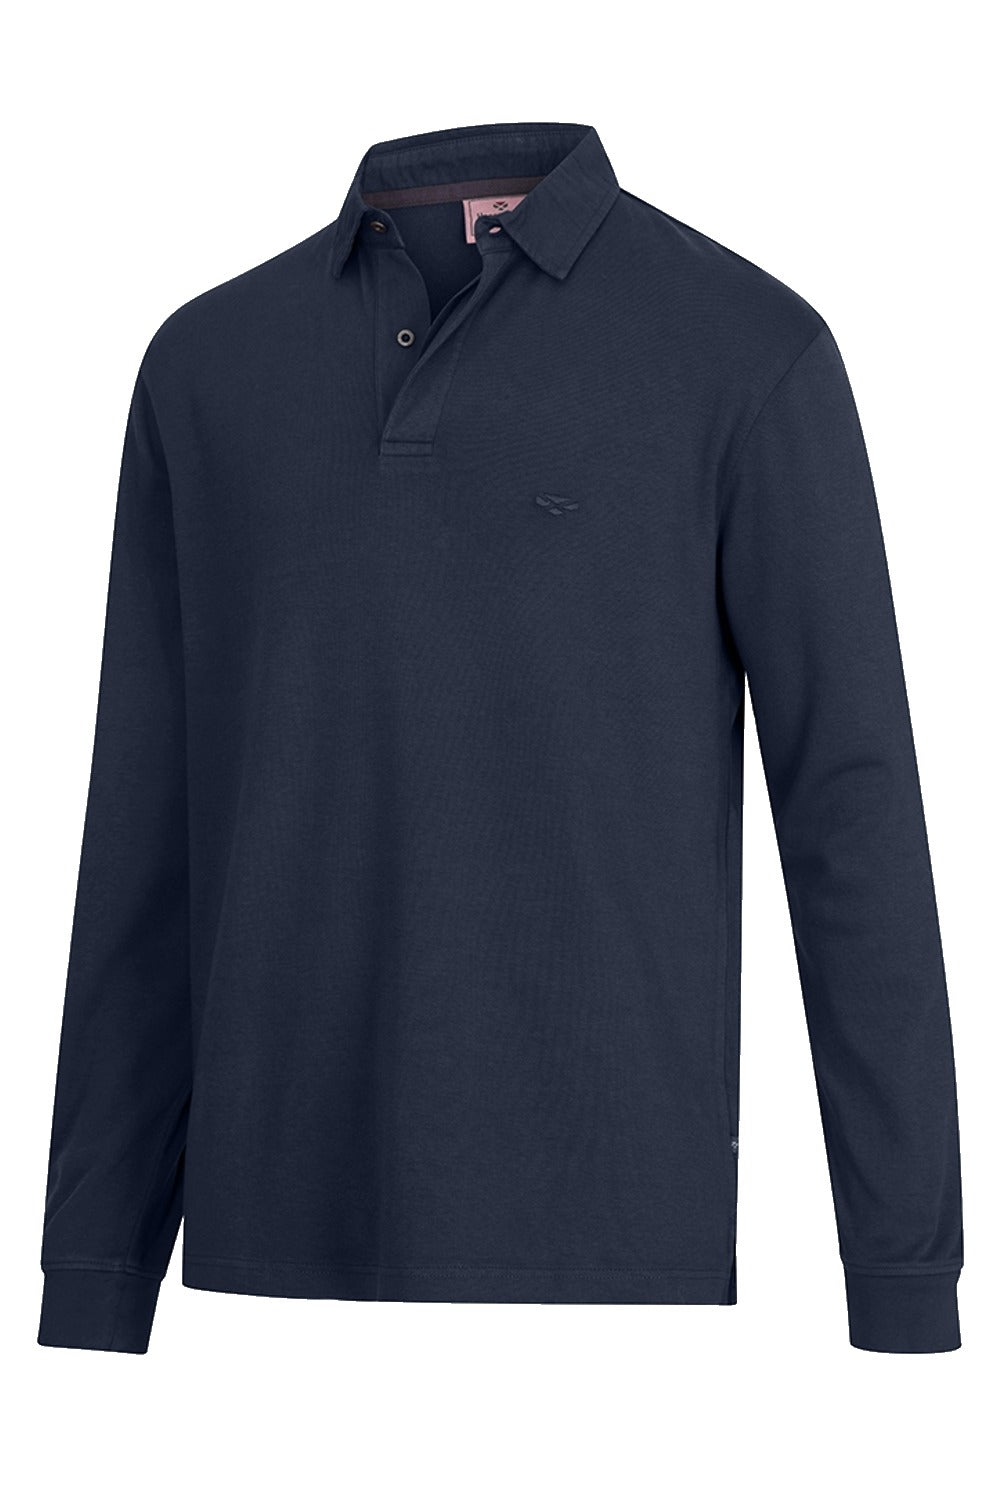 Hoggs of Fife Heriot Long Sleeve Rugby Shirt in Navy 